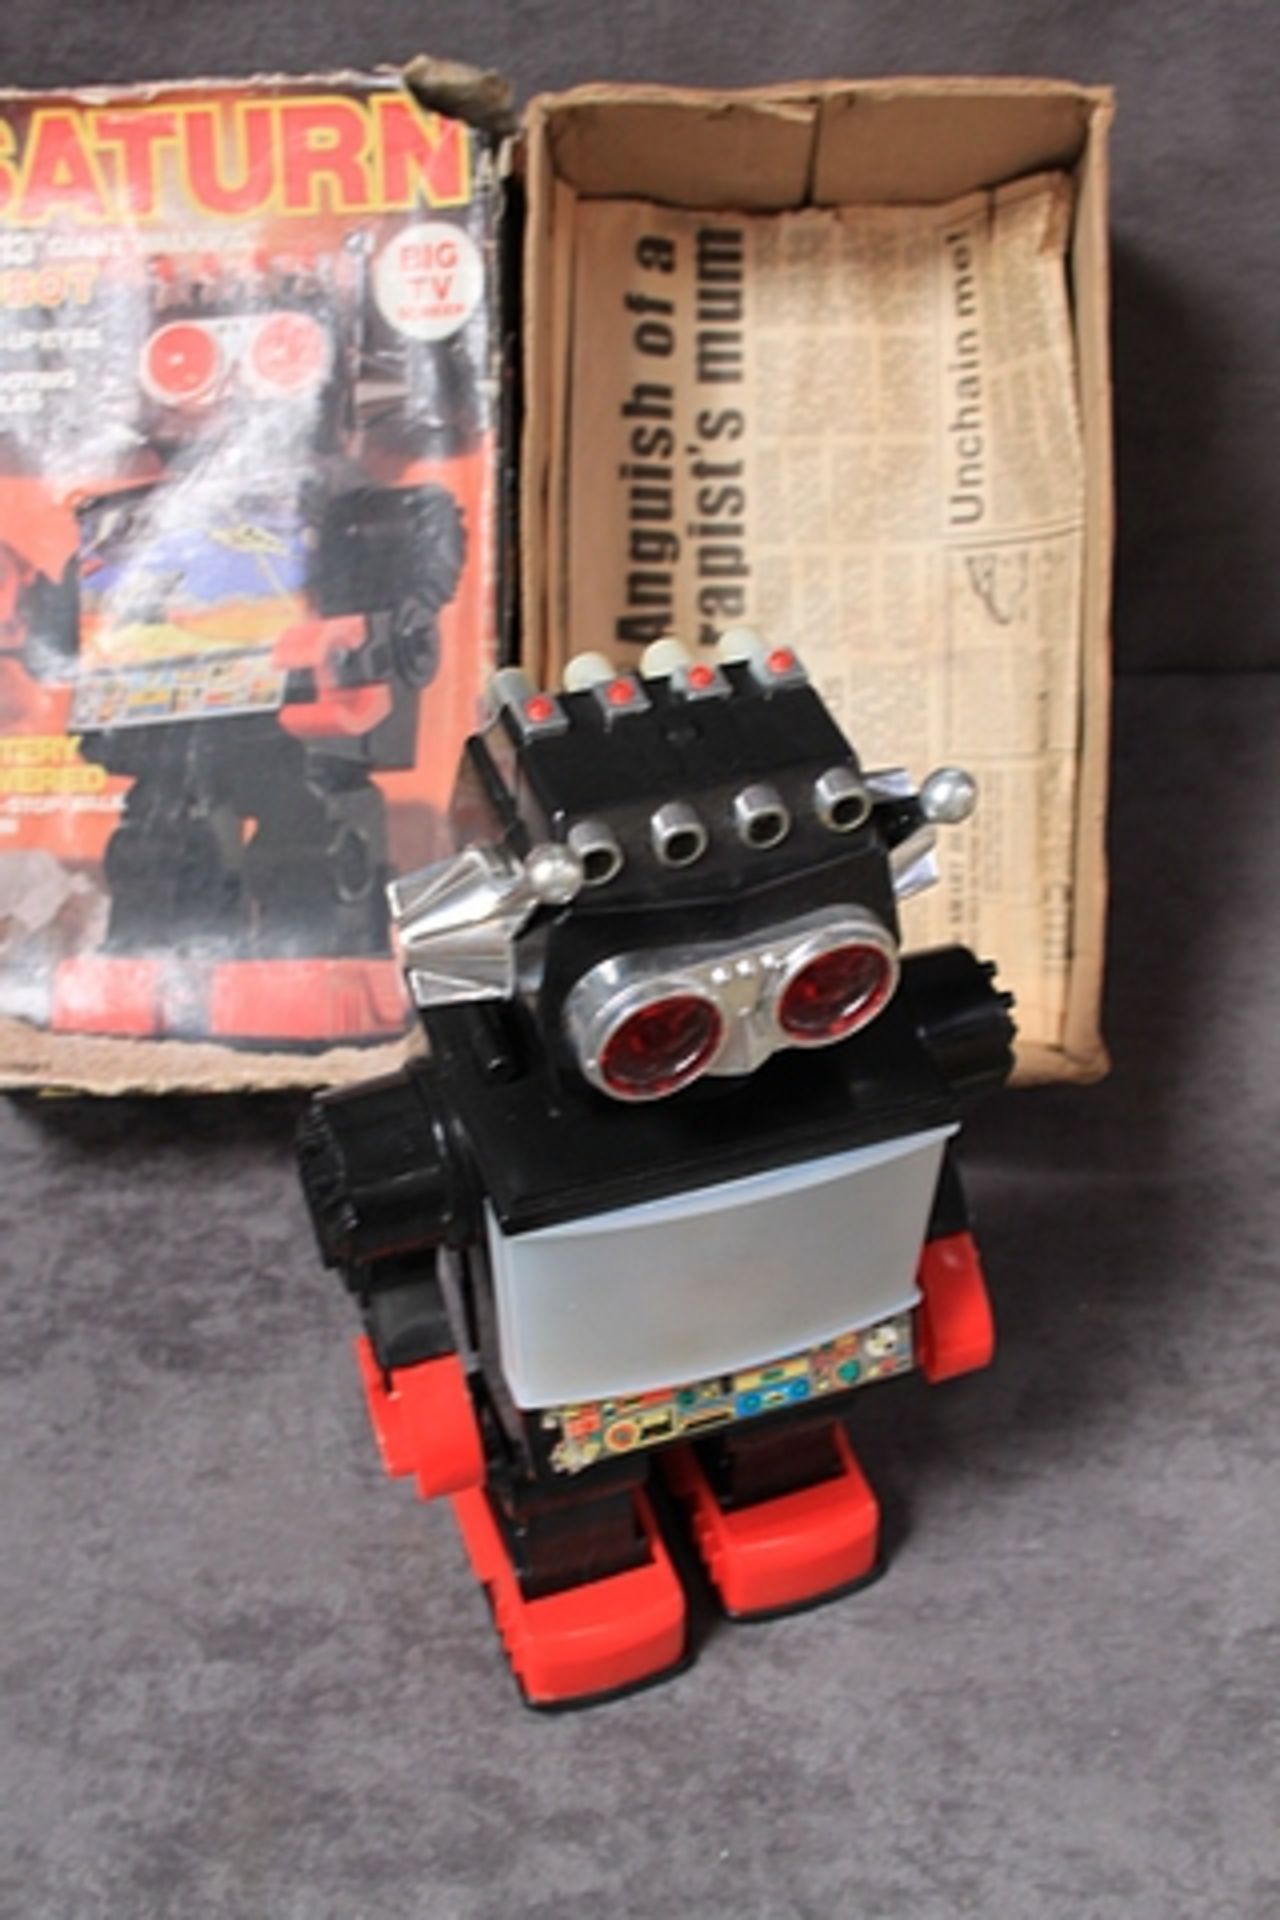 Kamco (Hong Kong) #1981 Saturn 13" Robot in a poor box (missiles missing)